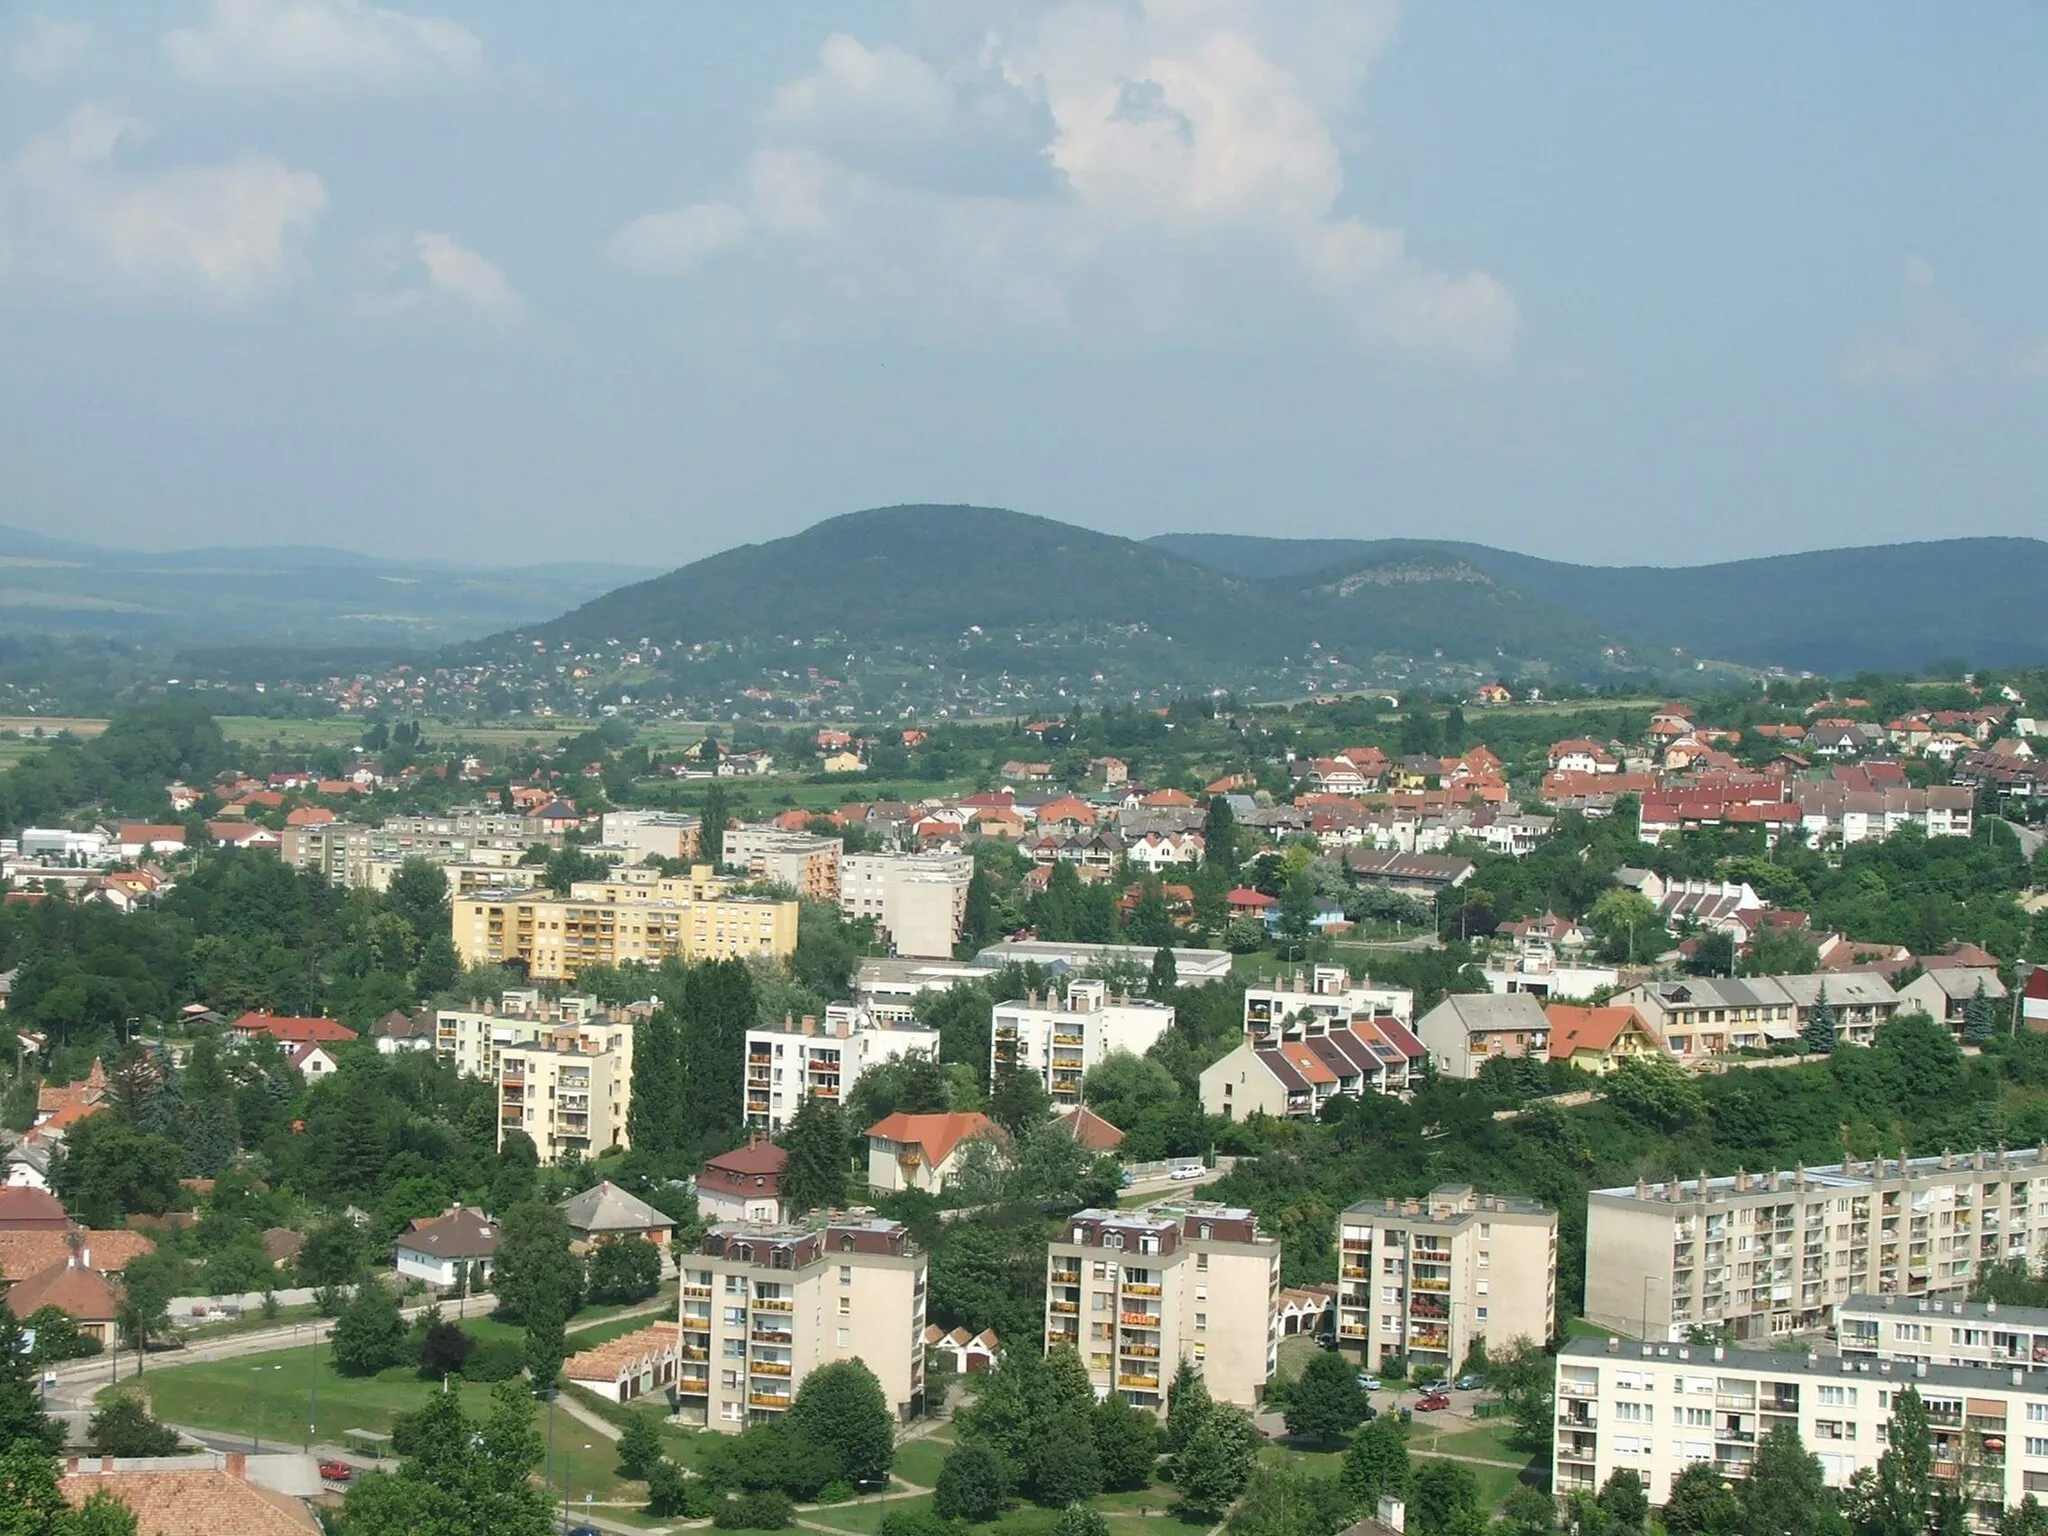 Photo showing: The modern "Bánom" part of Esztergom, with the Szamárhegy hill in the background.